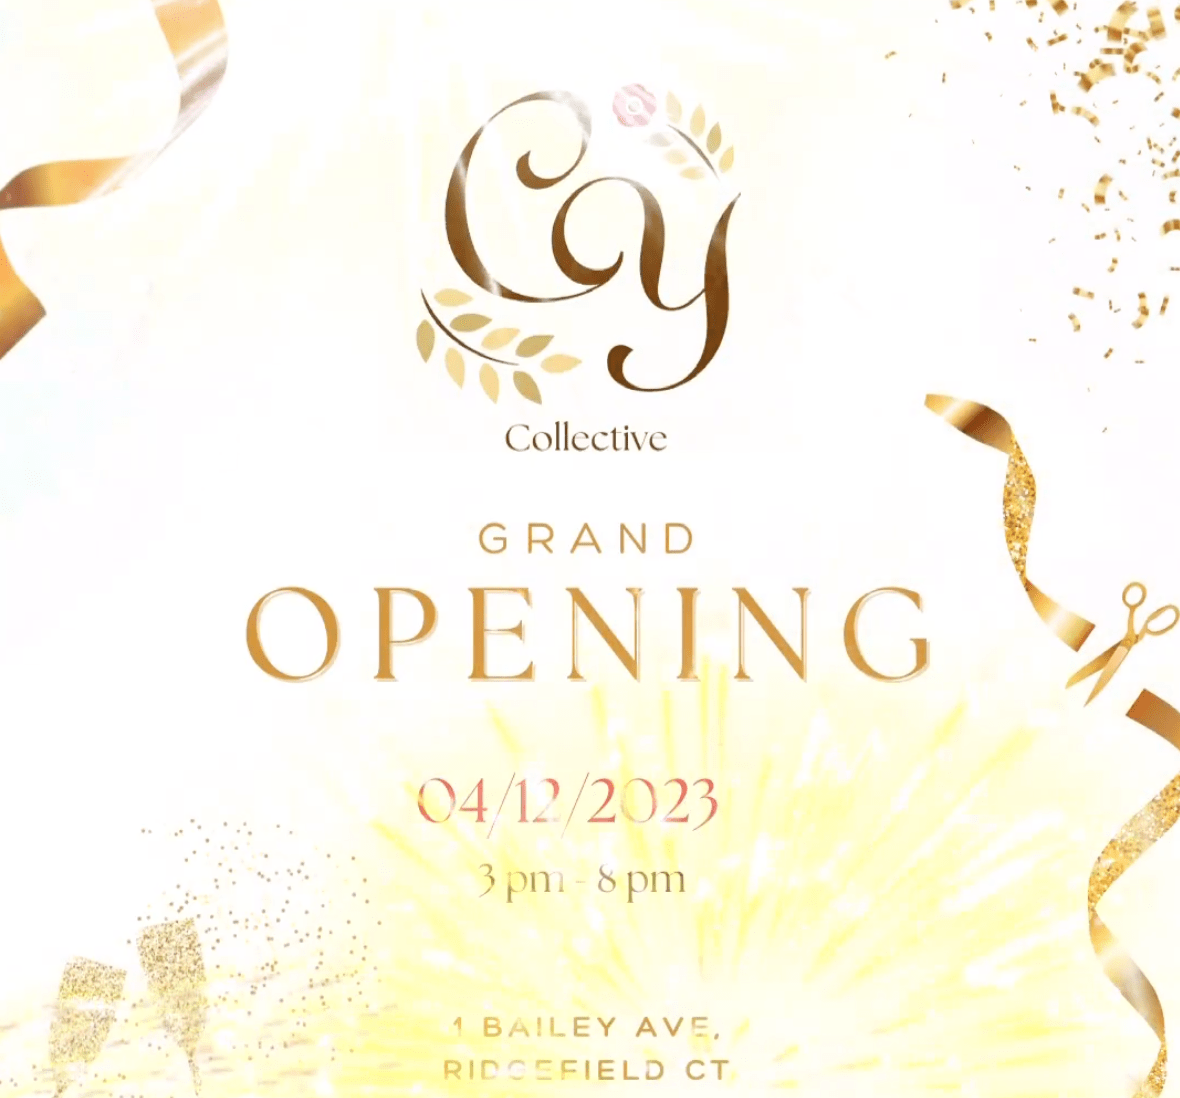 CY Collective Grand Opening Ridgefield CT